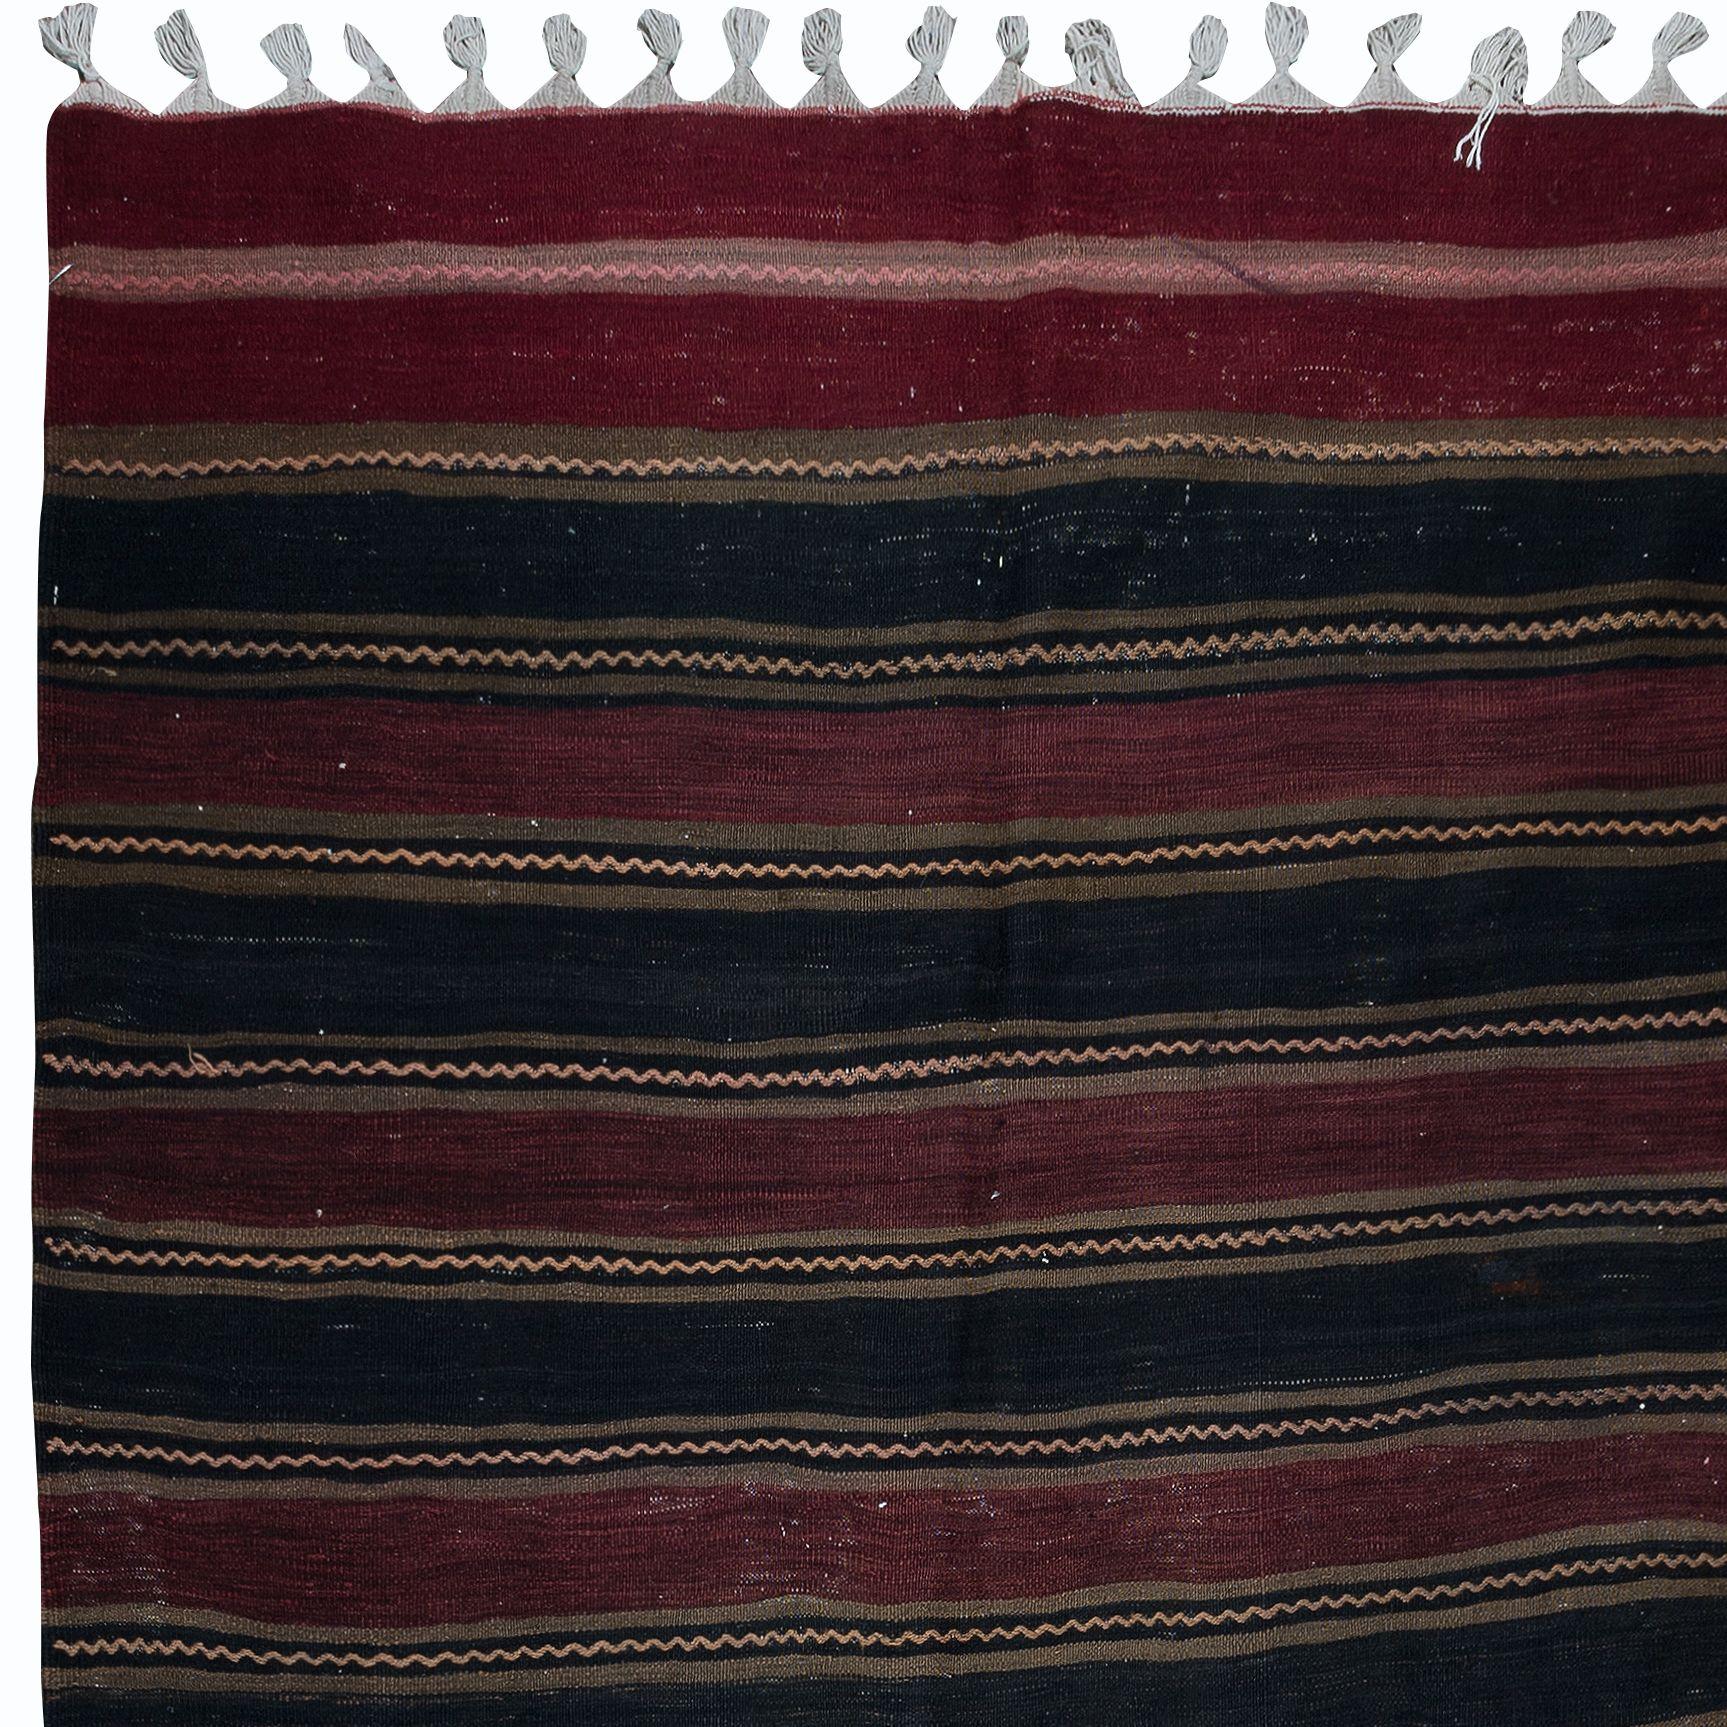 5.2x11 Ft Hand-Woven Striped Turkish Kilim Rug, FlatWeave Vintage Wool Carpet In Good Condition For Sale In Philadelphia, PA